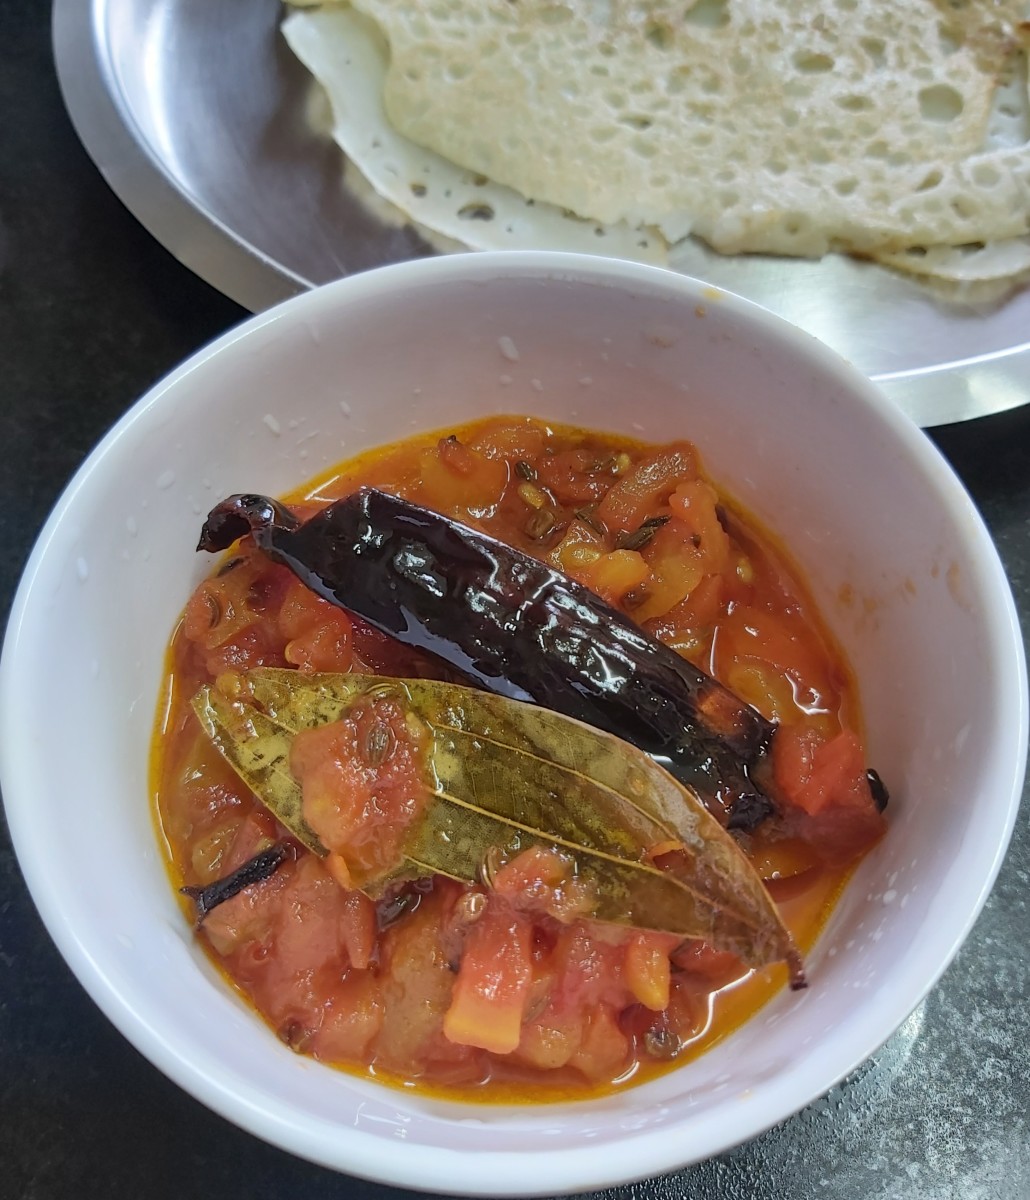 North Indian-style tomato chutney is a common accompaniment to many meals.